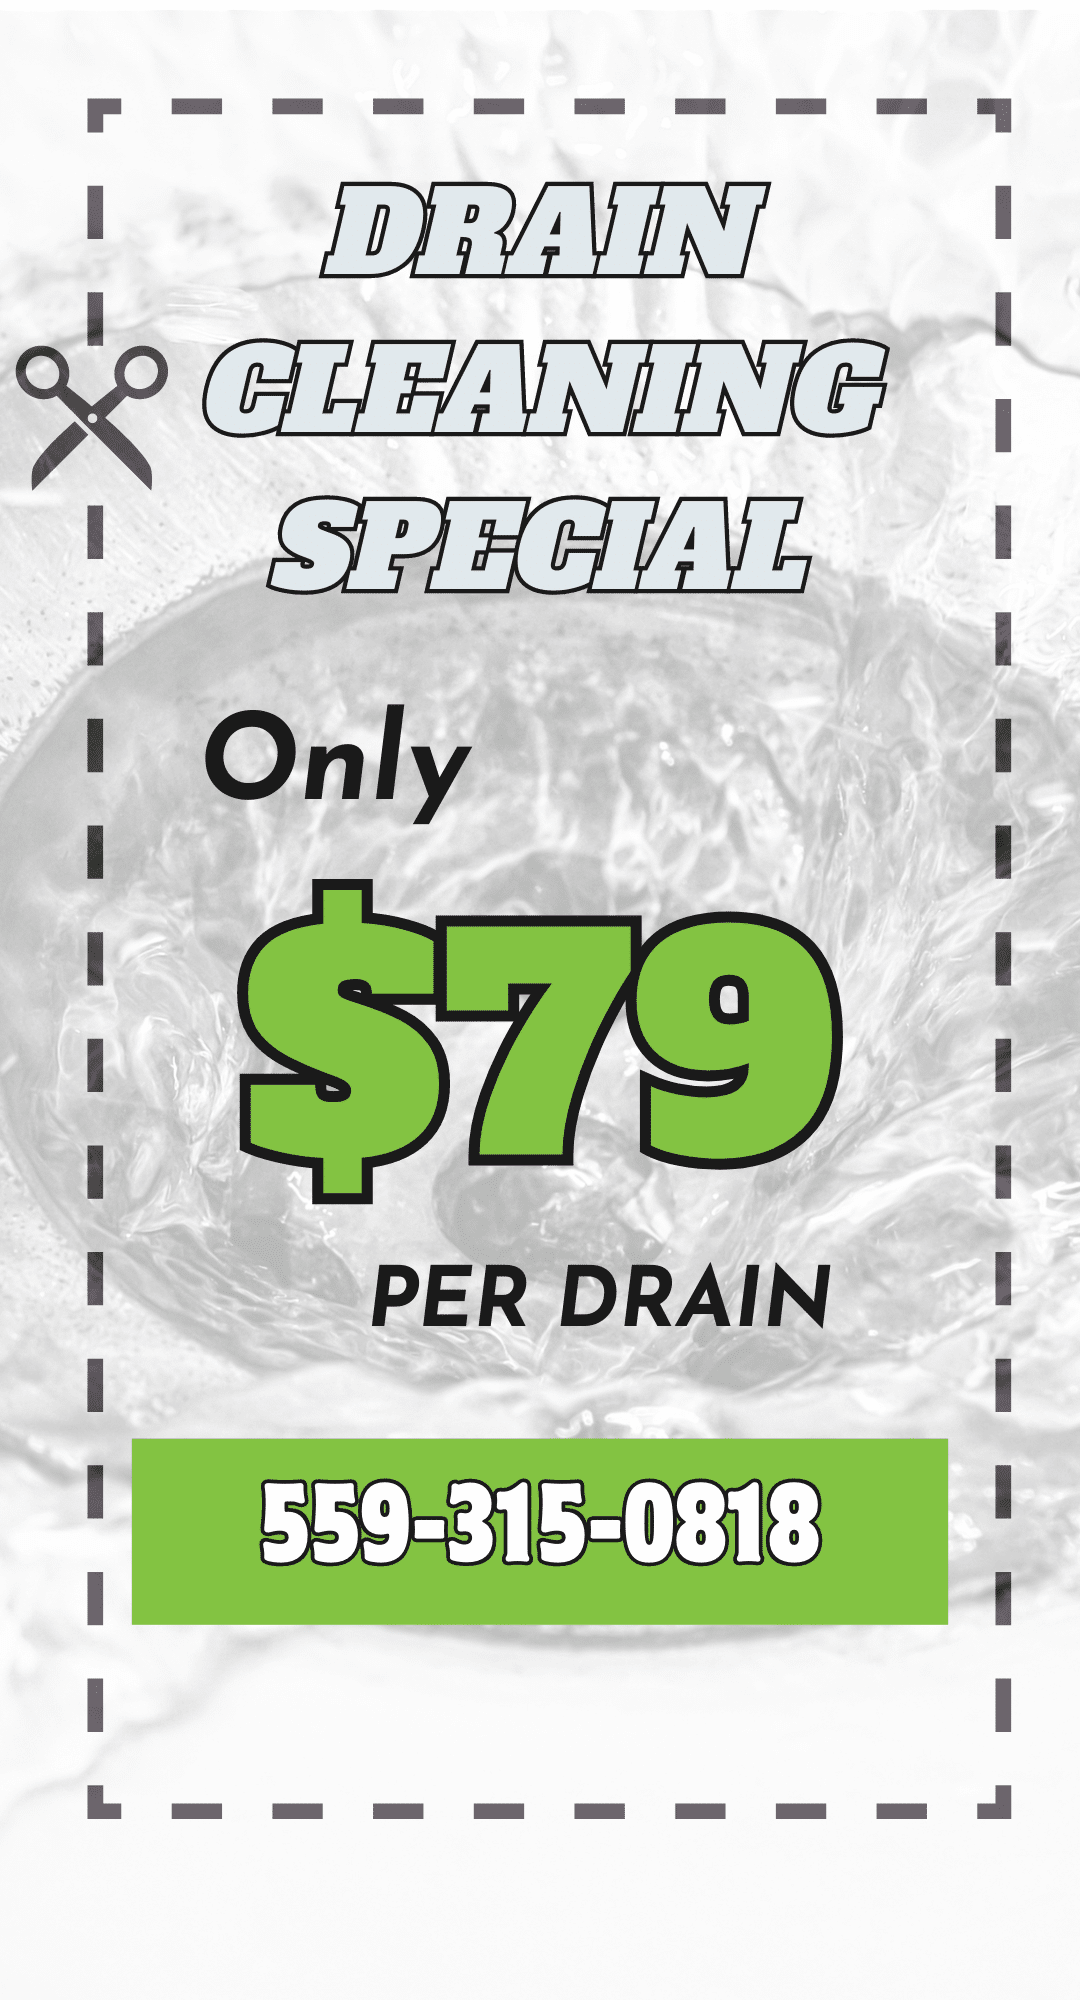 Balanced Comfort's $79 Drain Cleaning coupon